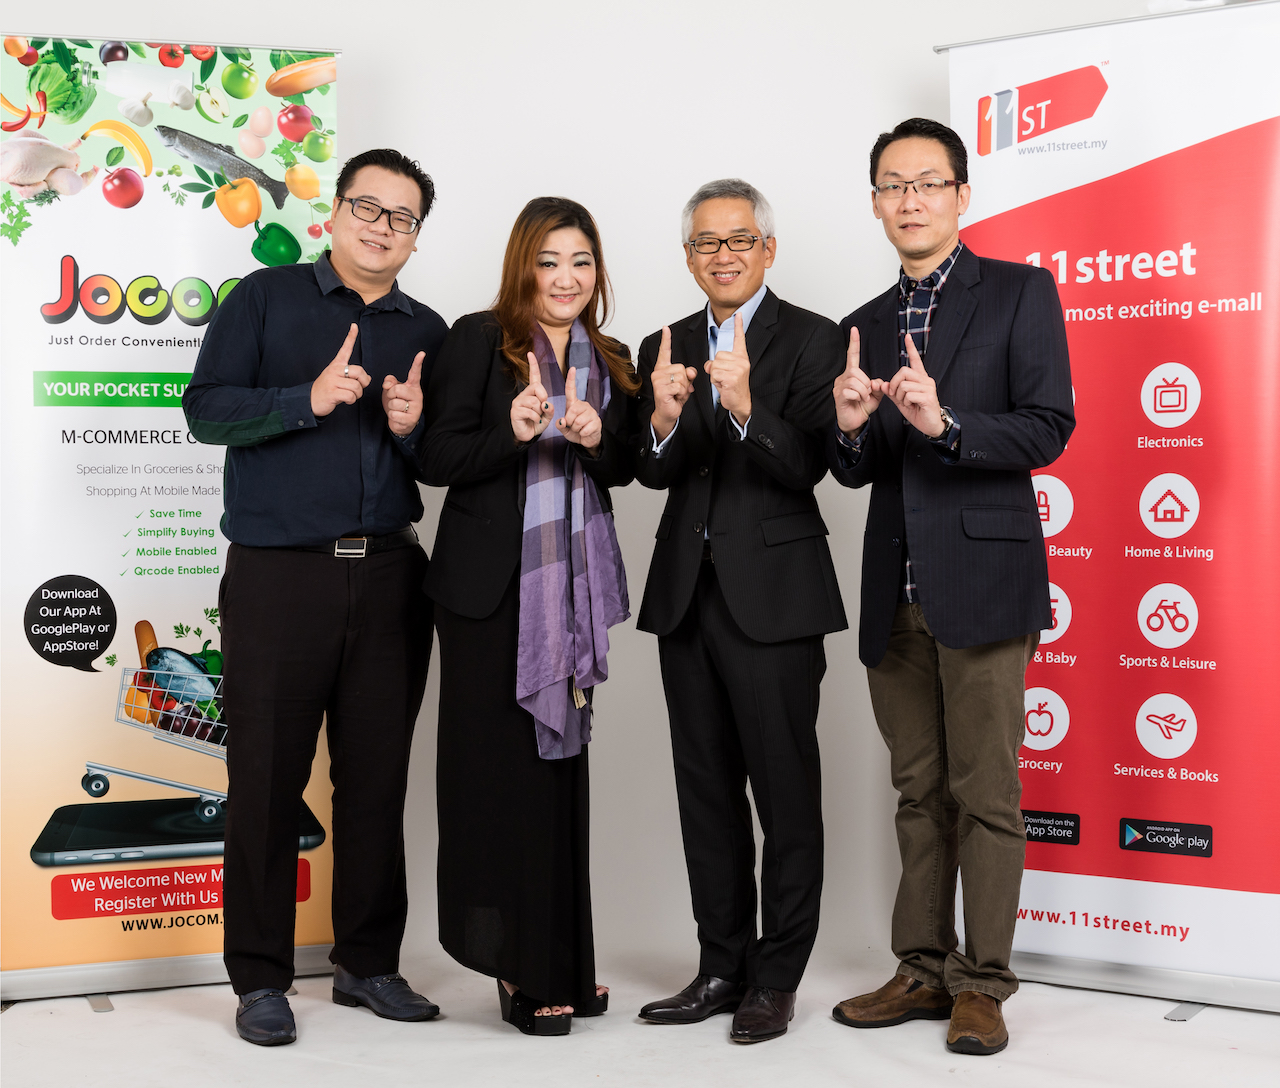 Joshua Sew, Executive Director of JOCOM; Agnes Chua, Managing Director of JOCOM; Hosoek Kim, CEO of 11street and Henry Ho, General Manager, Merchandising Division 2 of 11street kickstart the new category launch with RM1 promotion offer on Grade C eggs and Gardenia Classic White Bread for shoppers.